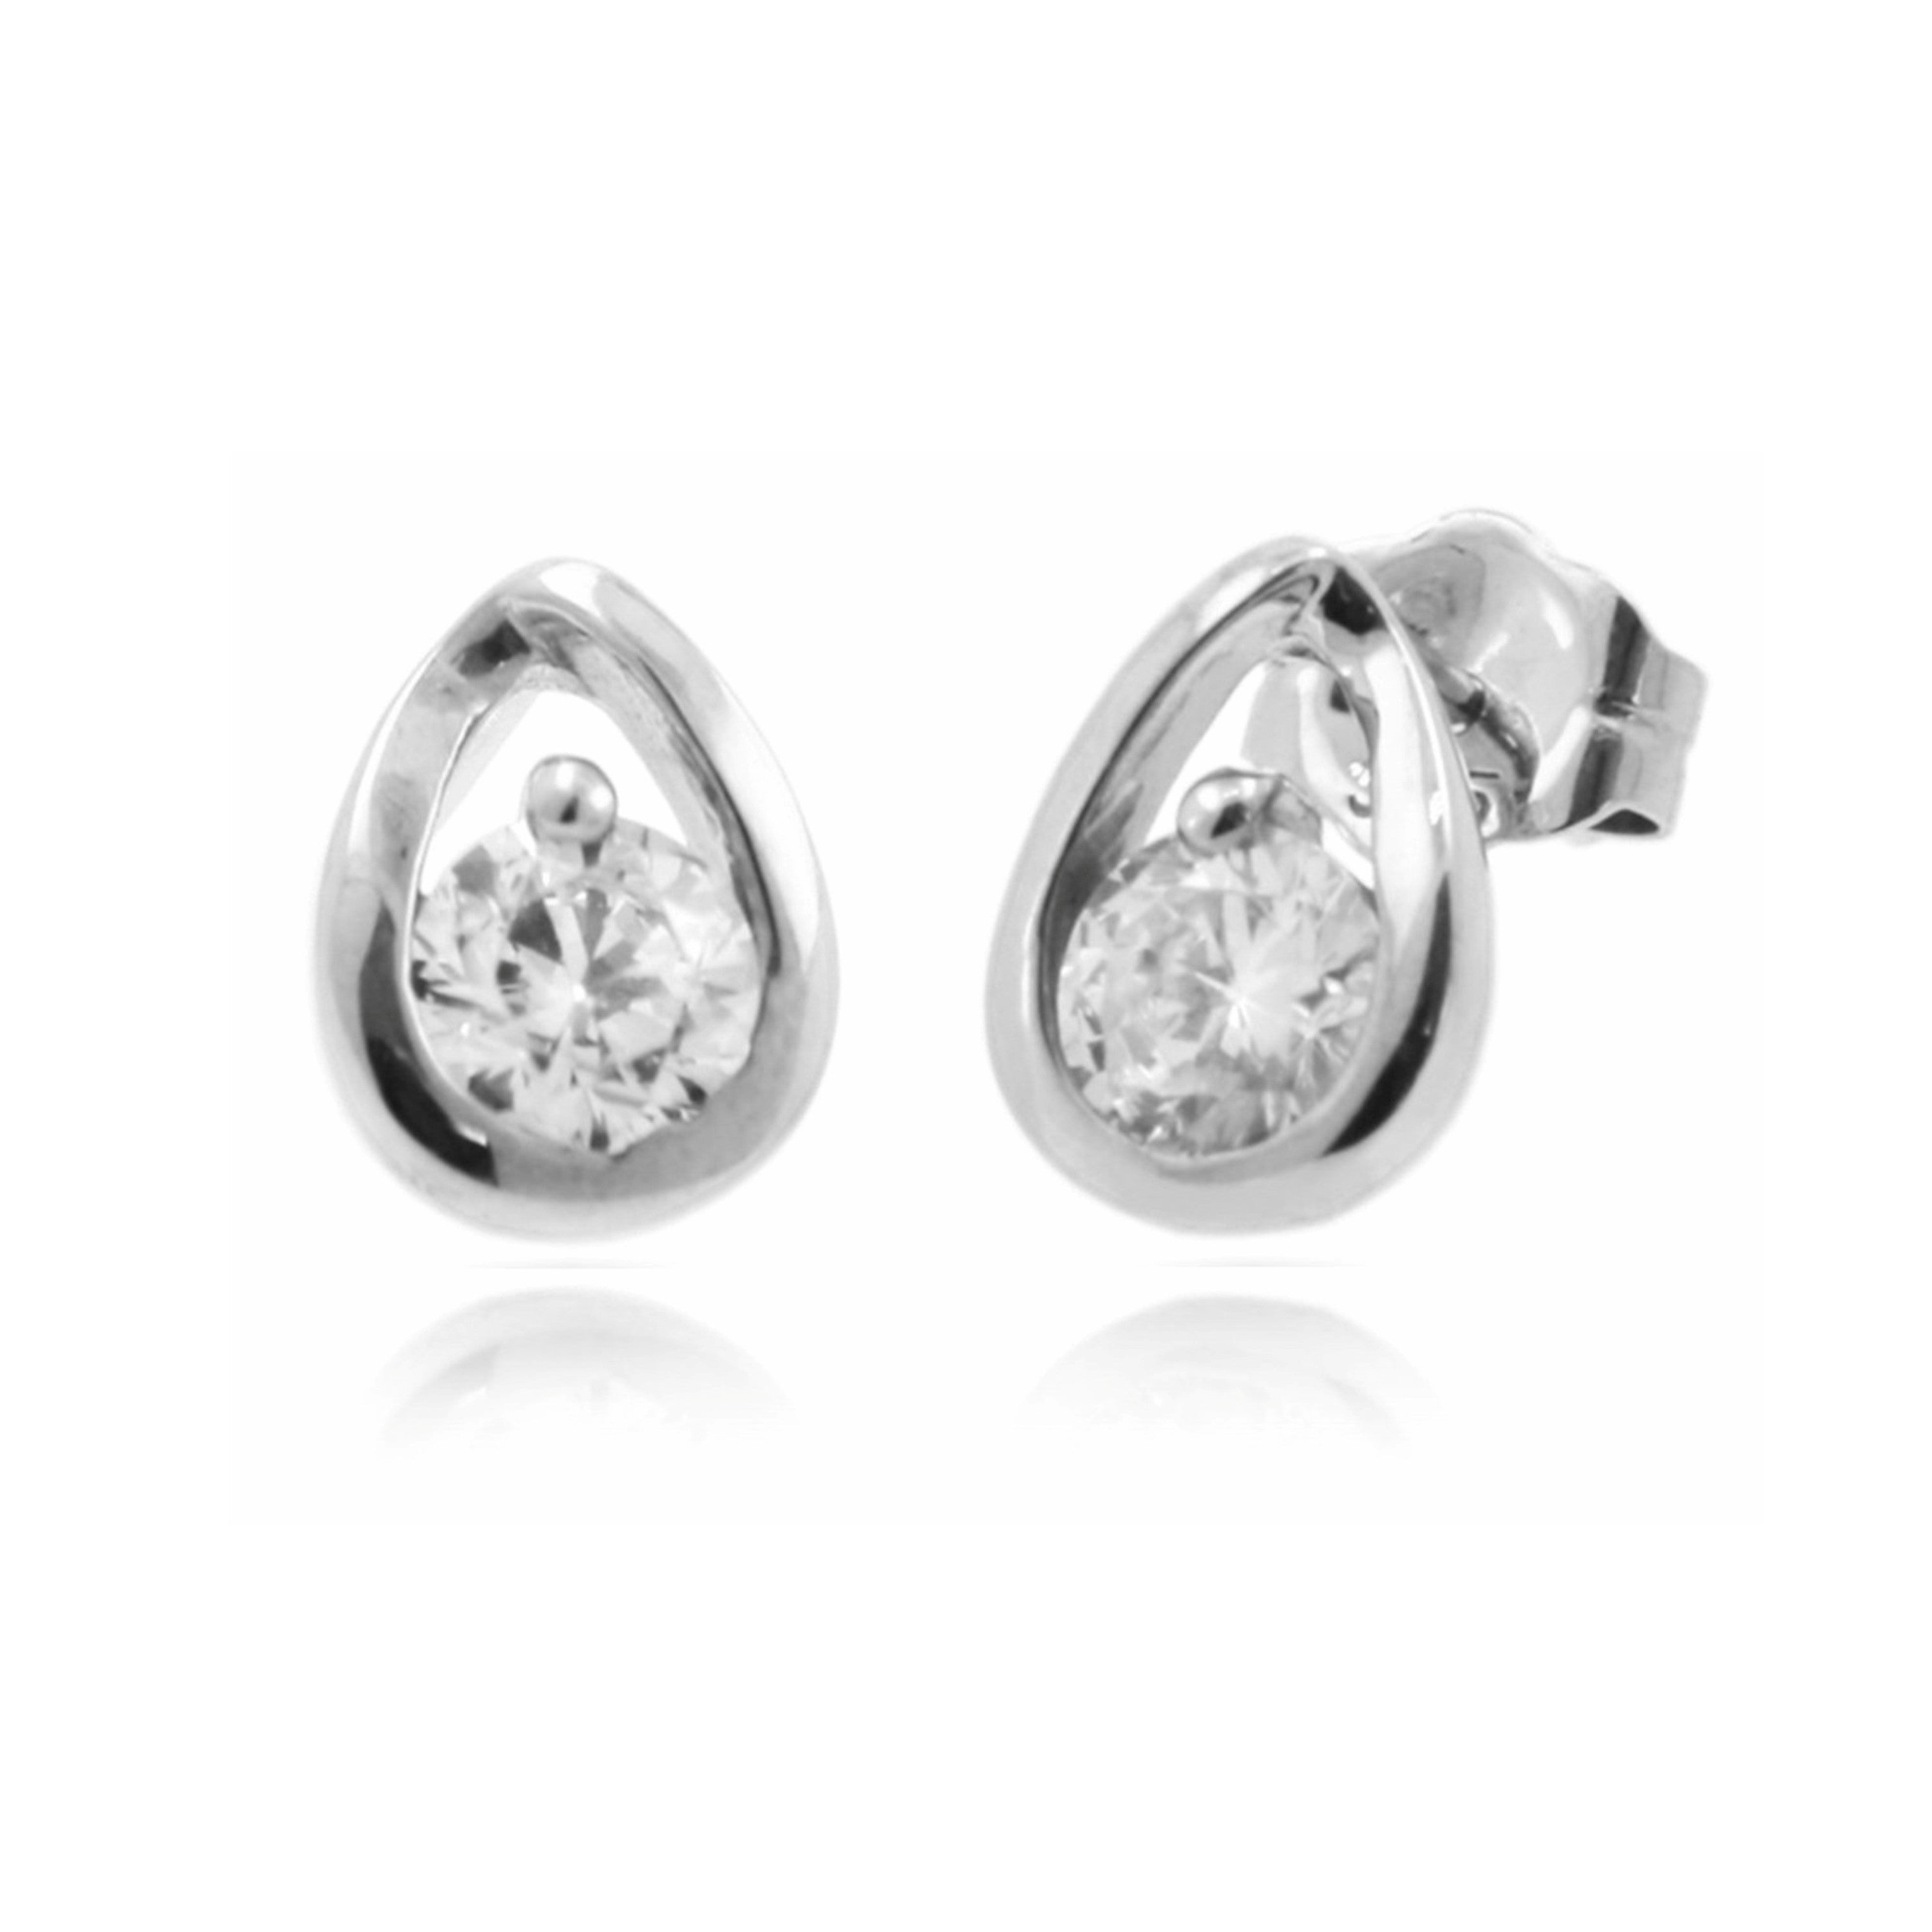 9ct White Gold Tear Drop Stud Earrings with Cubic Zirconia